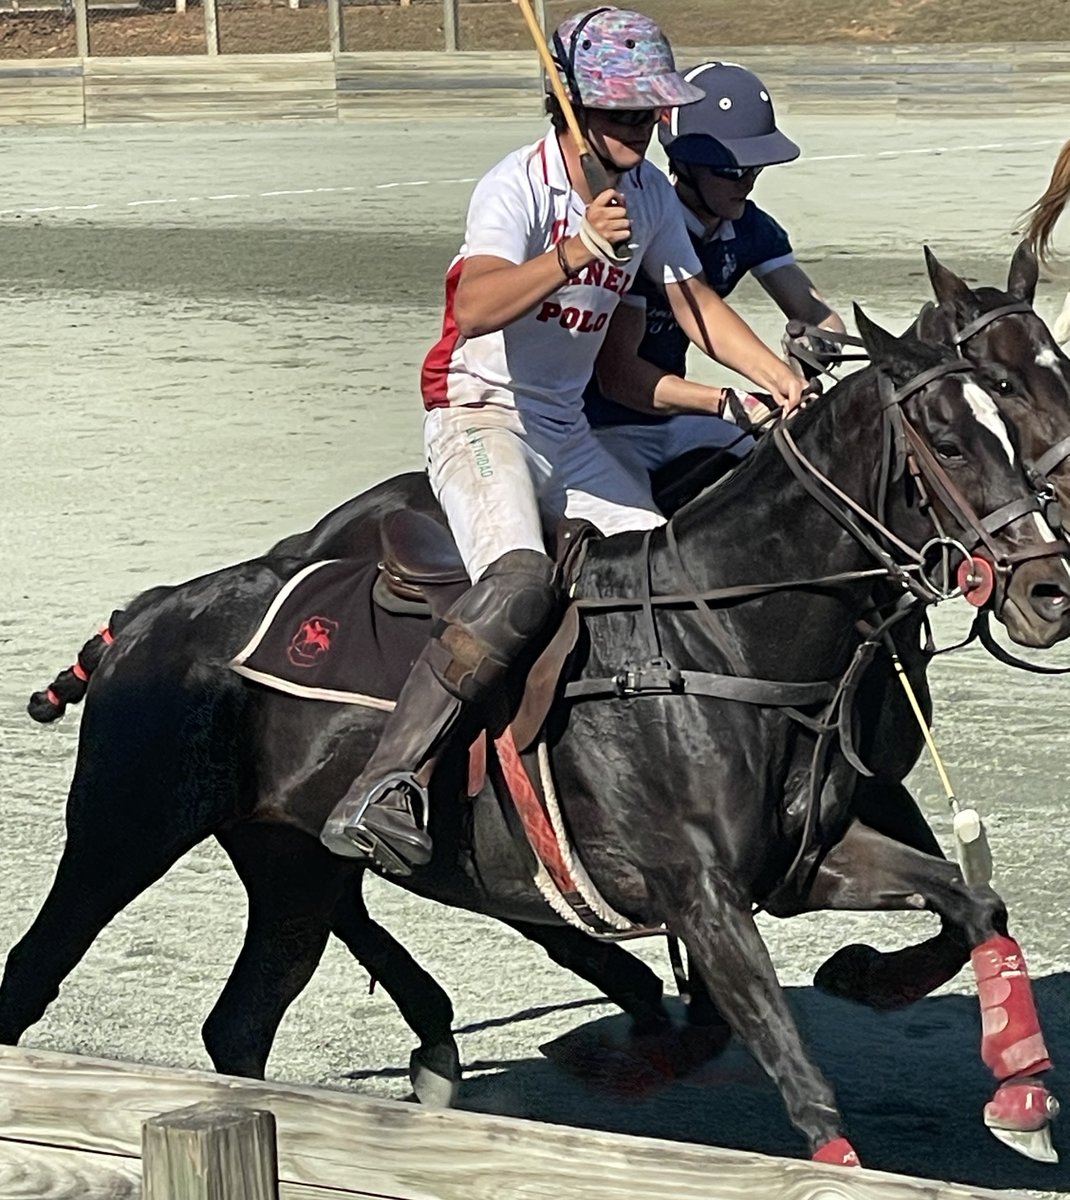 Every year, Arthrex donates up to two dozen ACP and ACP Max™ kits to @Cornell University, one of the oldest and most storied intercollegiate polo teams in the country, to help keep their horses in the best shape for competition. #Arthrex ACP Max™ (autologous conditioned